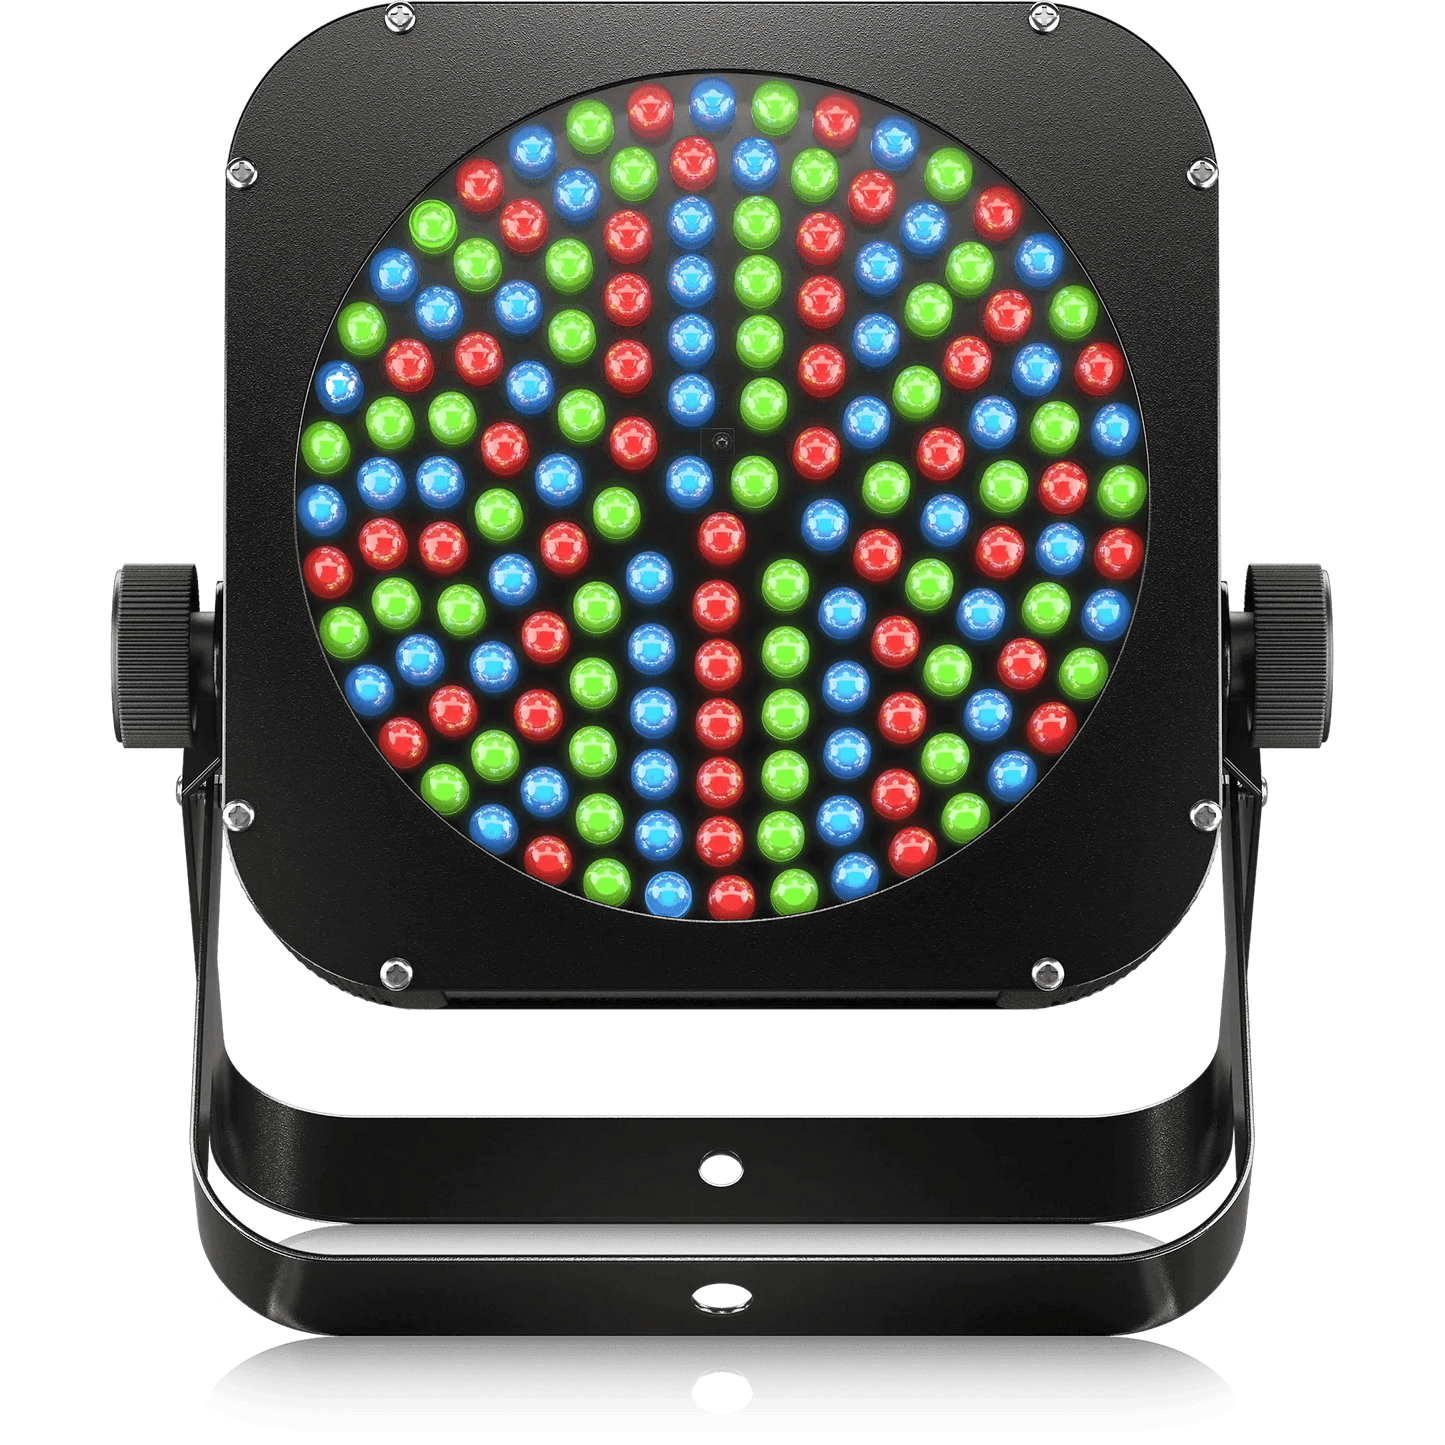 Behringer FLOOD PANEL FP150 Compact Floodlight with 150 RGB LED